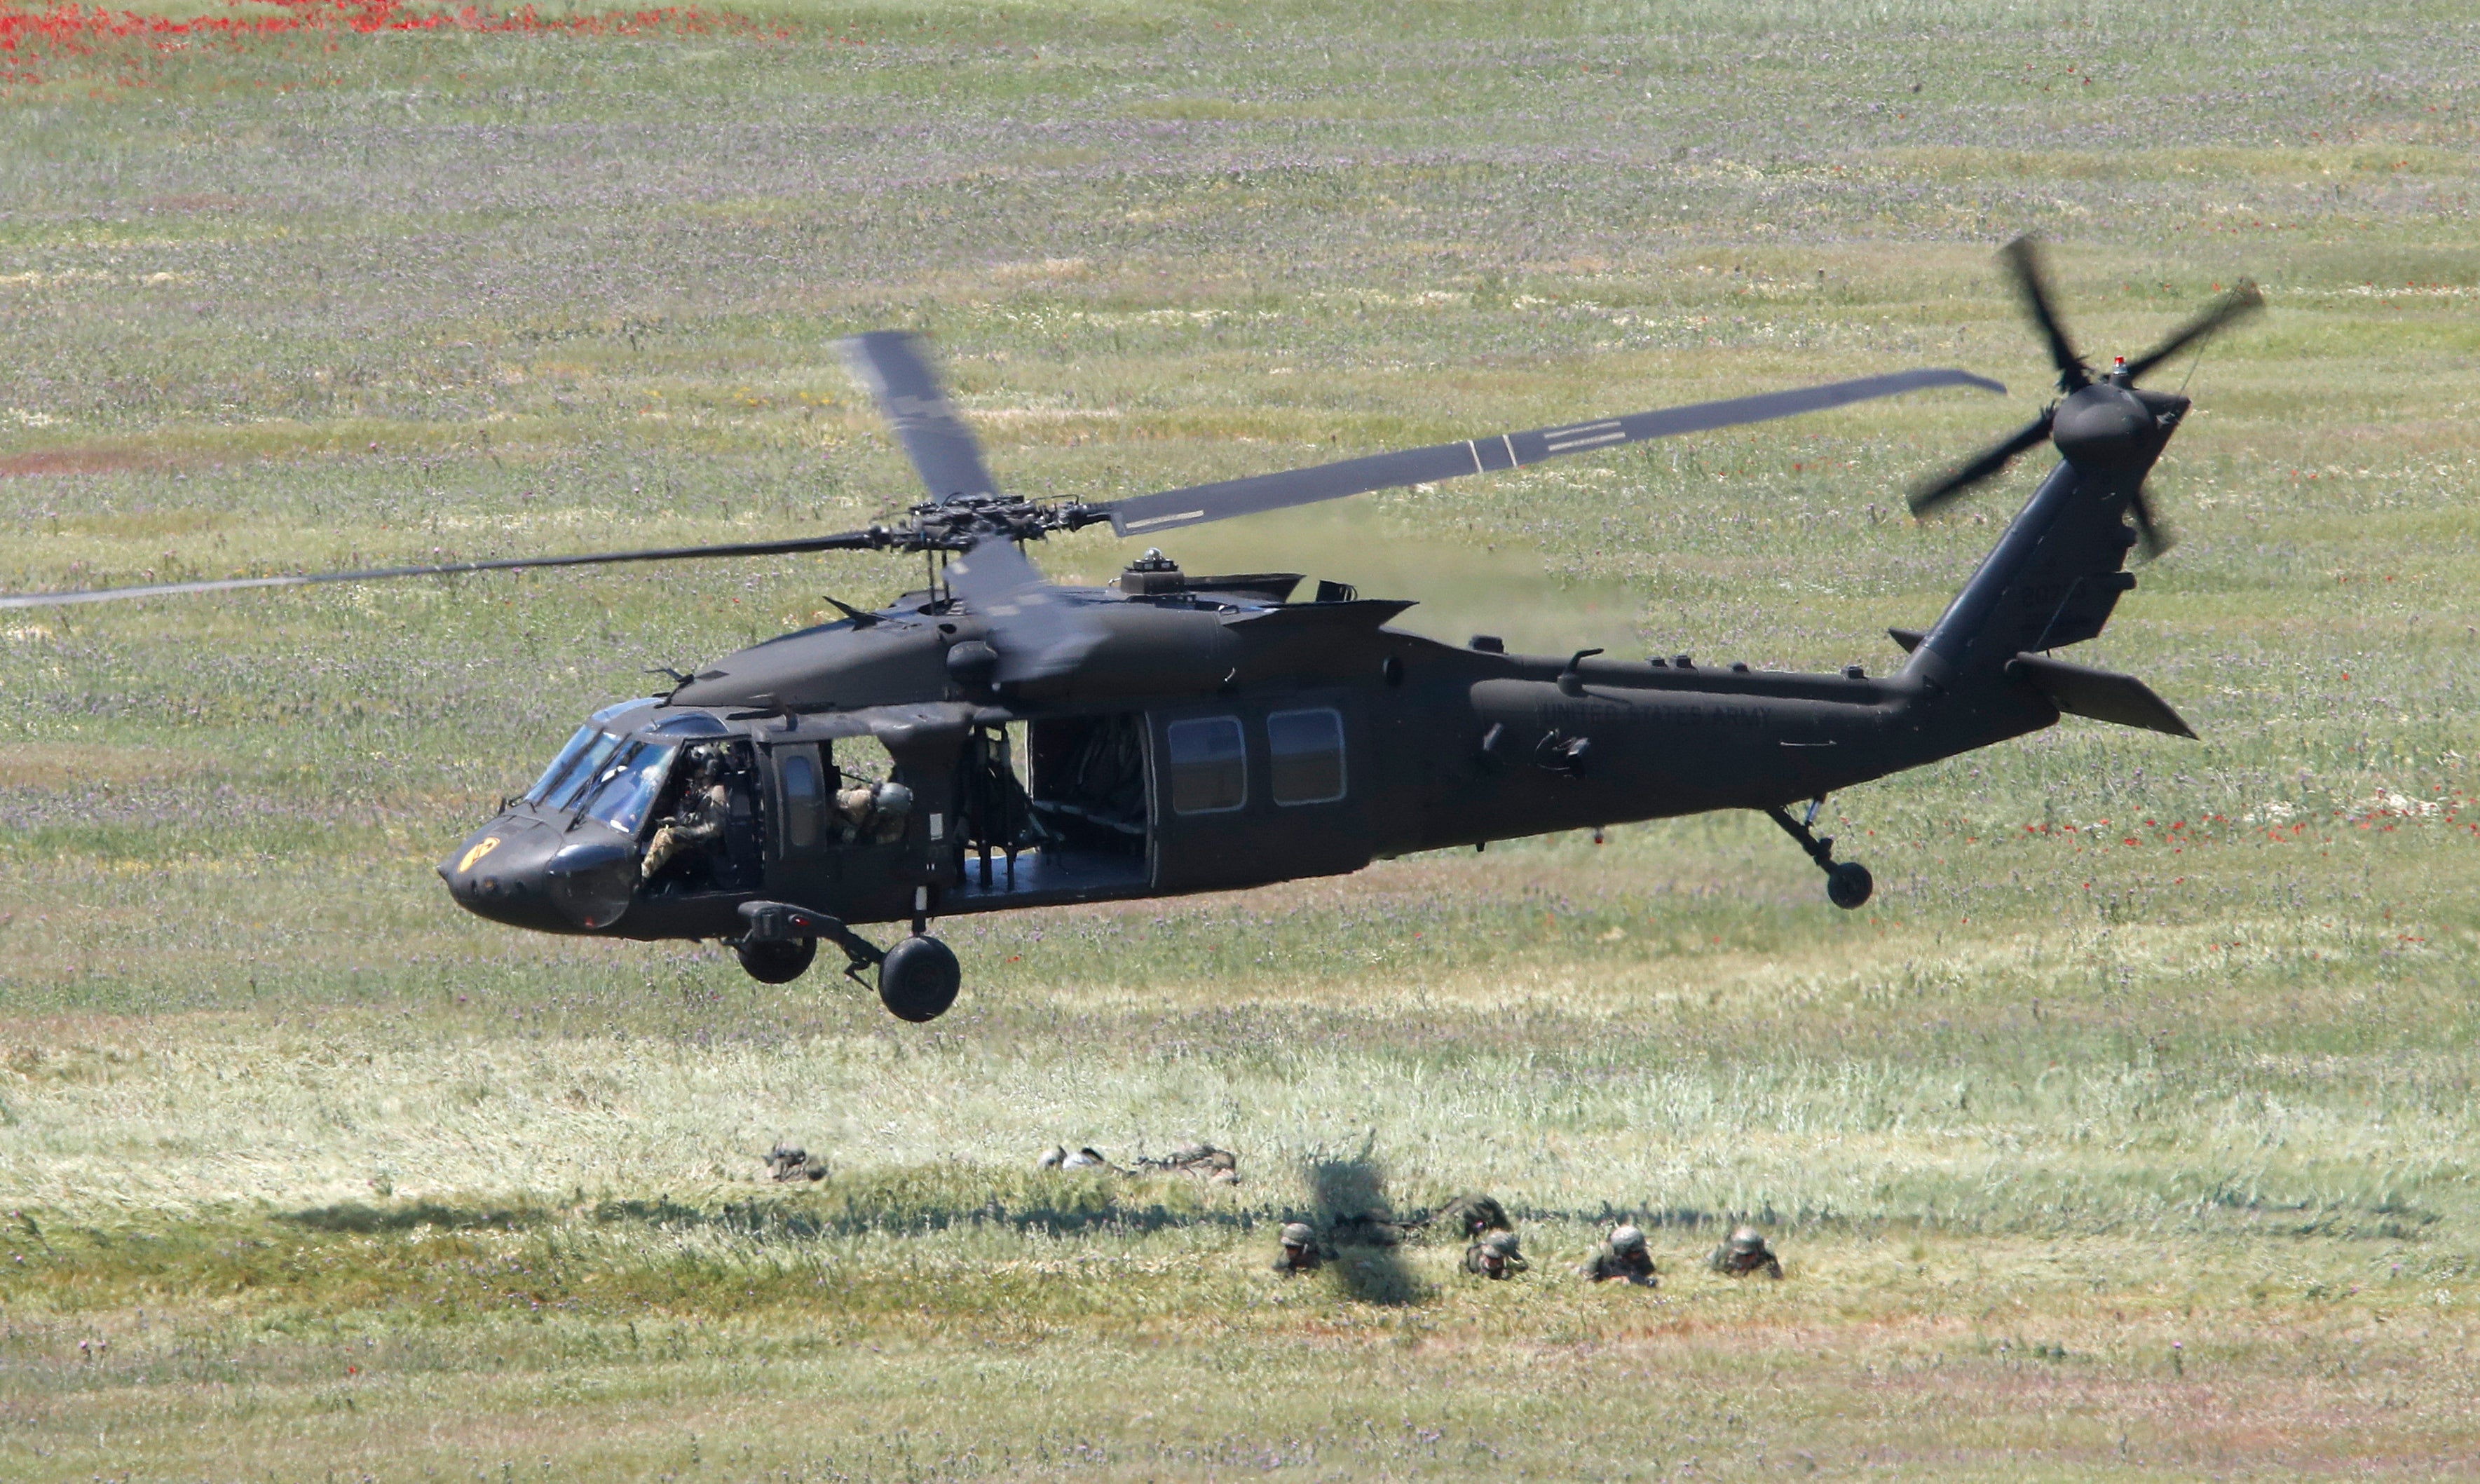 A US Black Hawk helicopter takes off after deploying soldiers during the Swift Response 22 military exercise in 2022